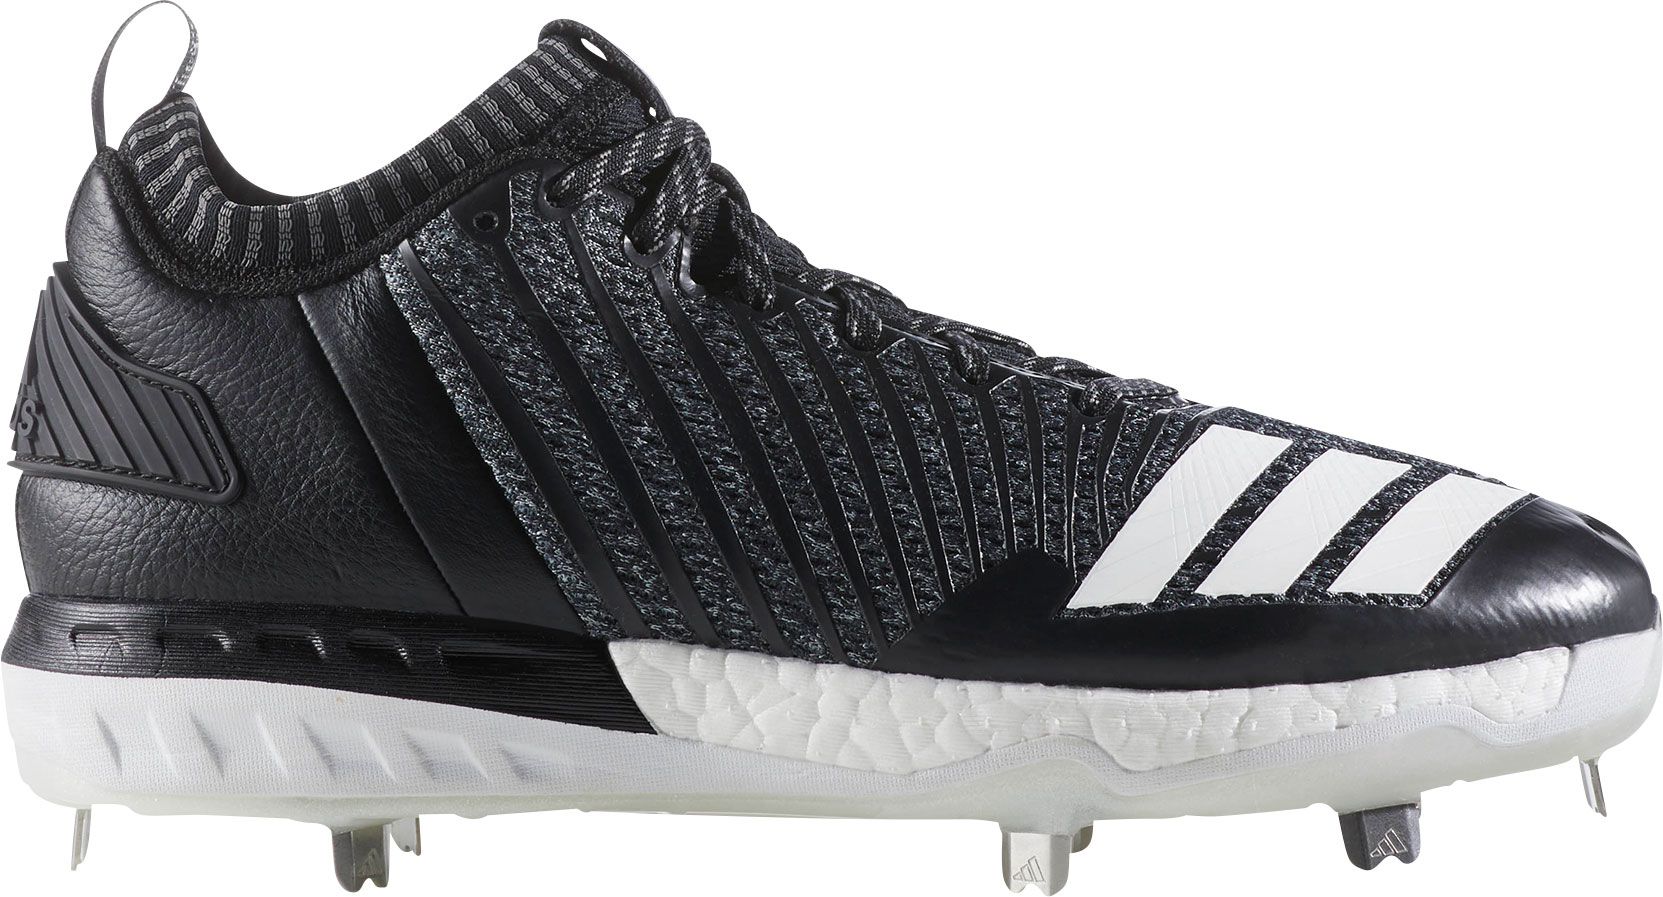 adidas energy boost icon 2.0 men's baseball cleat